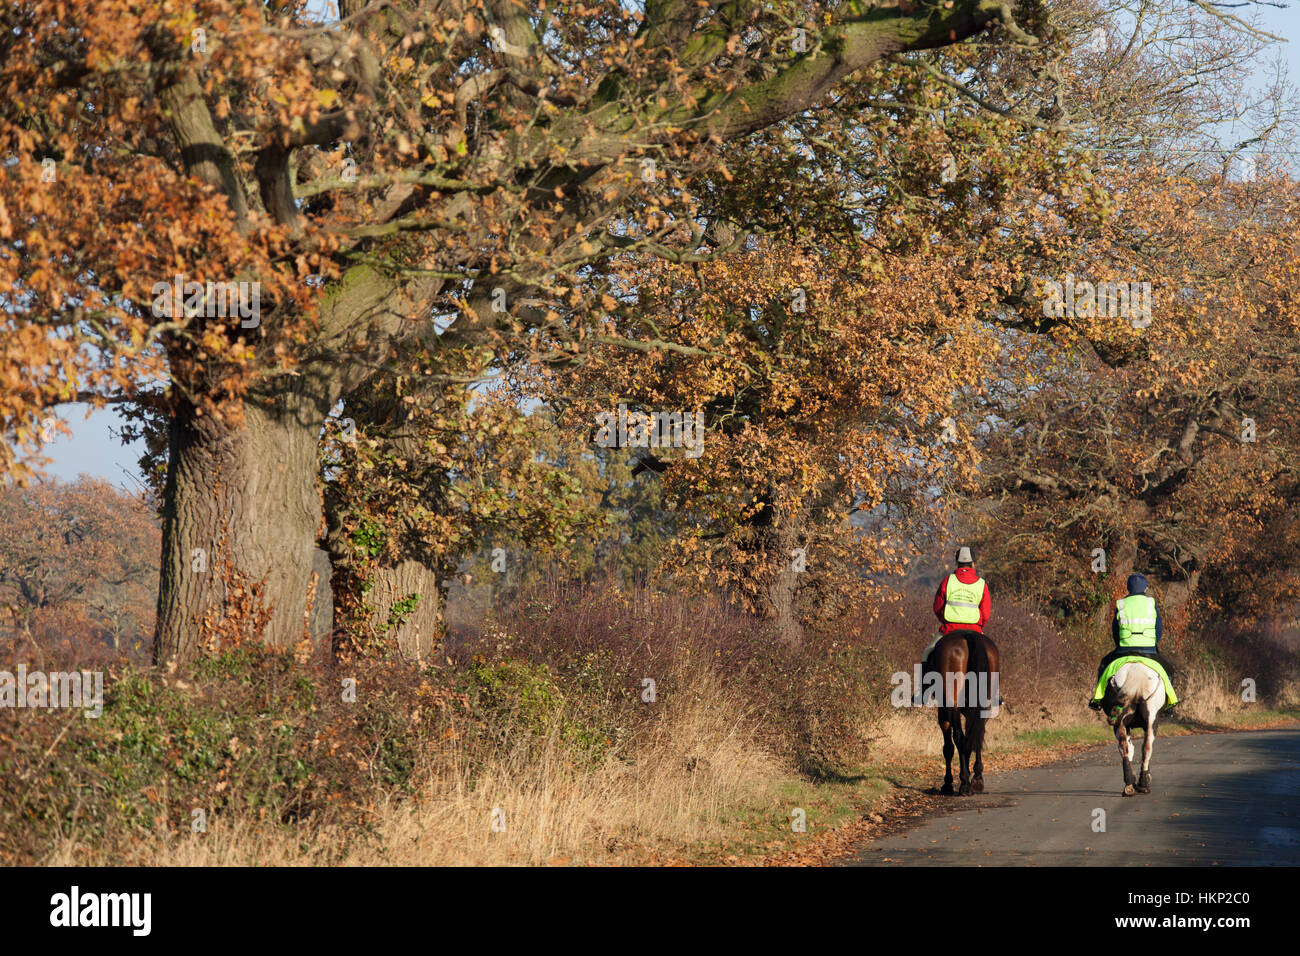 Rural Cheshire, England. Picturesque autumnal view of horse riders on a rural road near the village of Coddington. Stock Photo